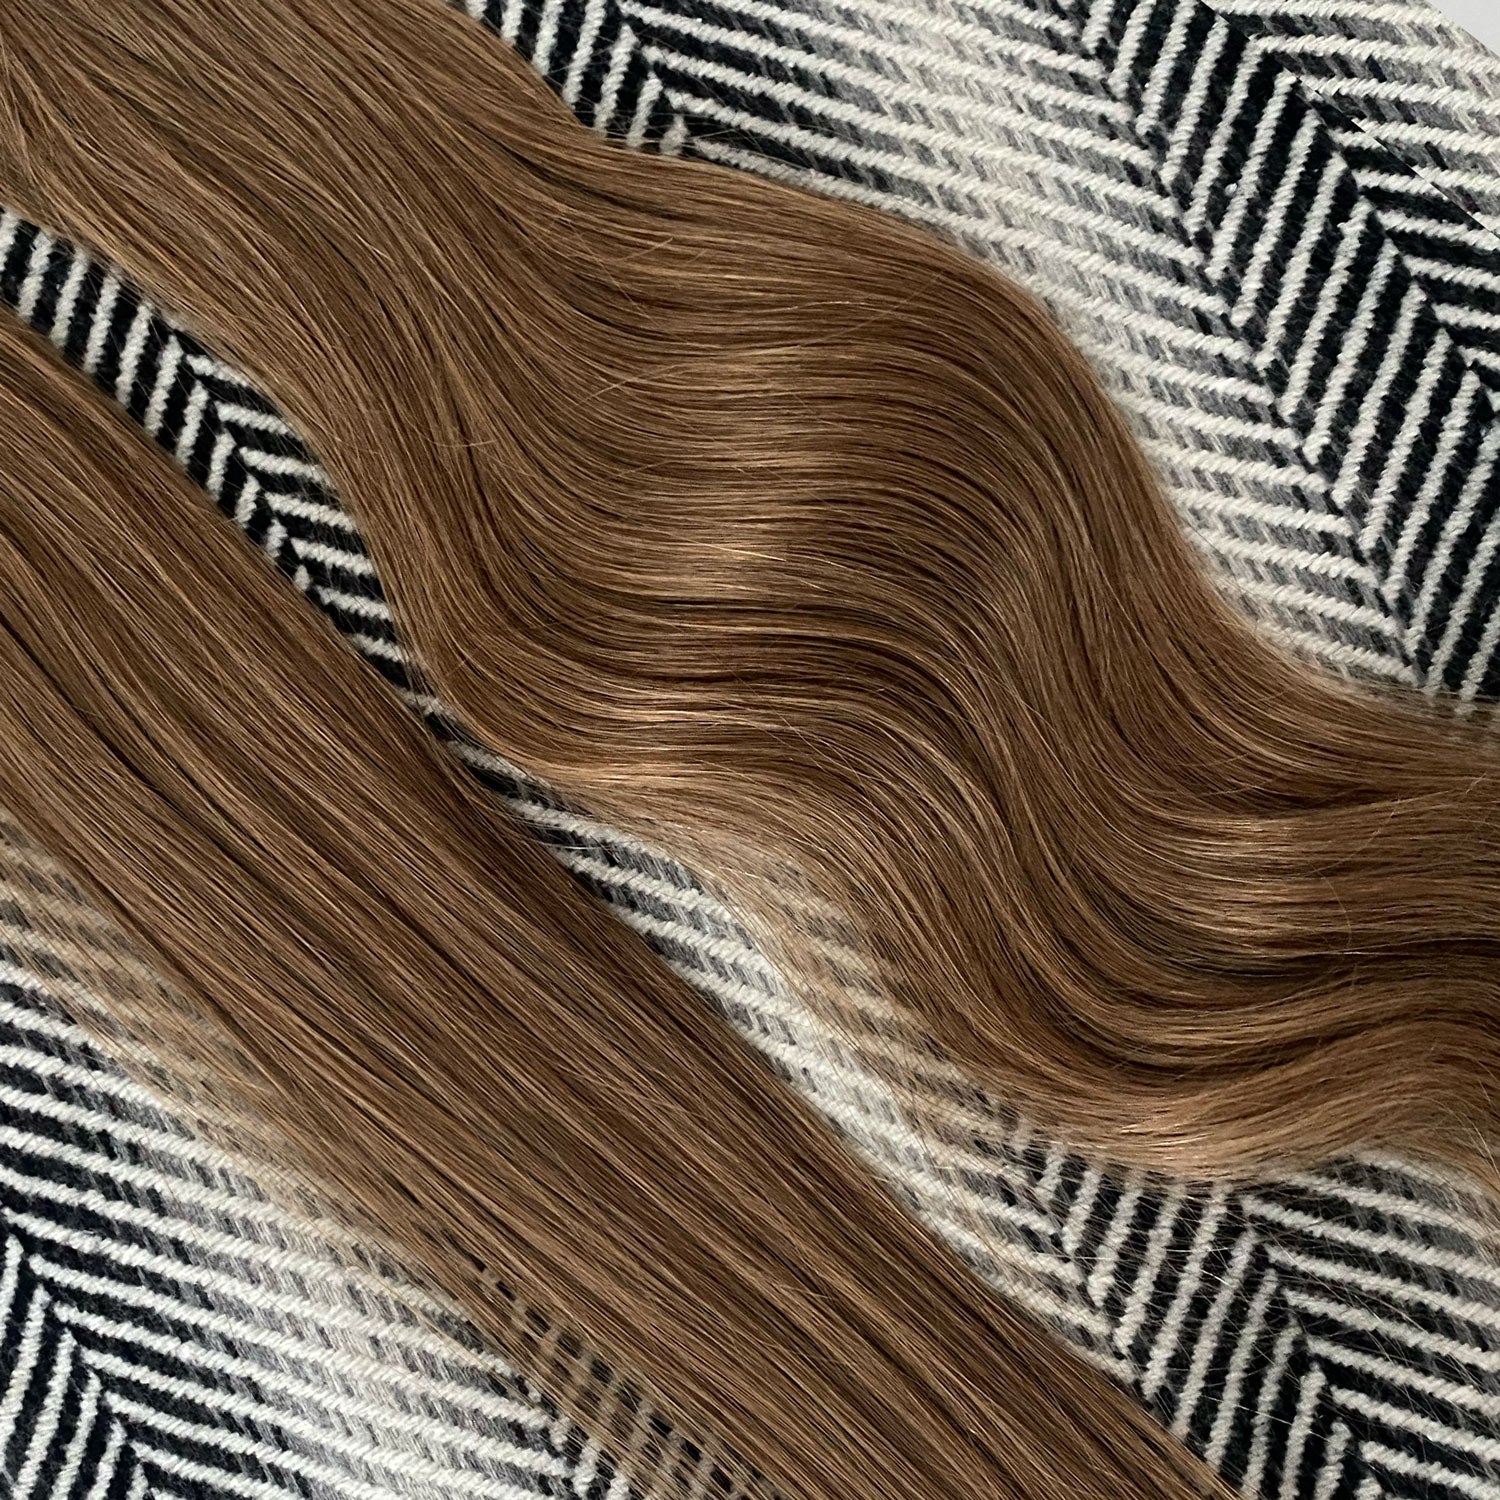 Tape Hair Extensions  21" #12 Dirty Blonde